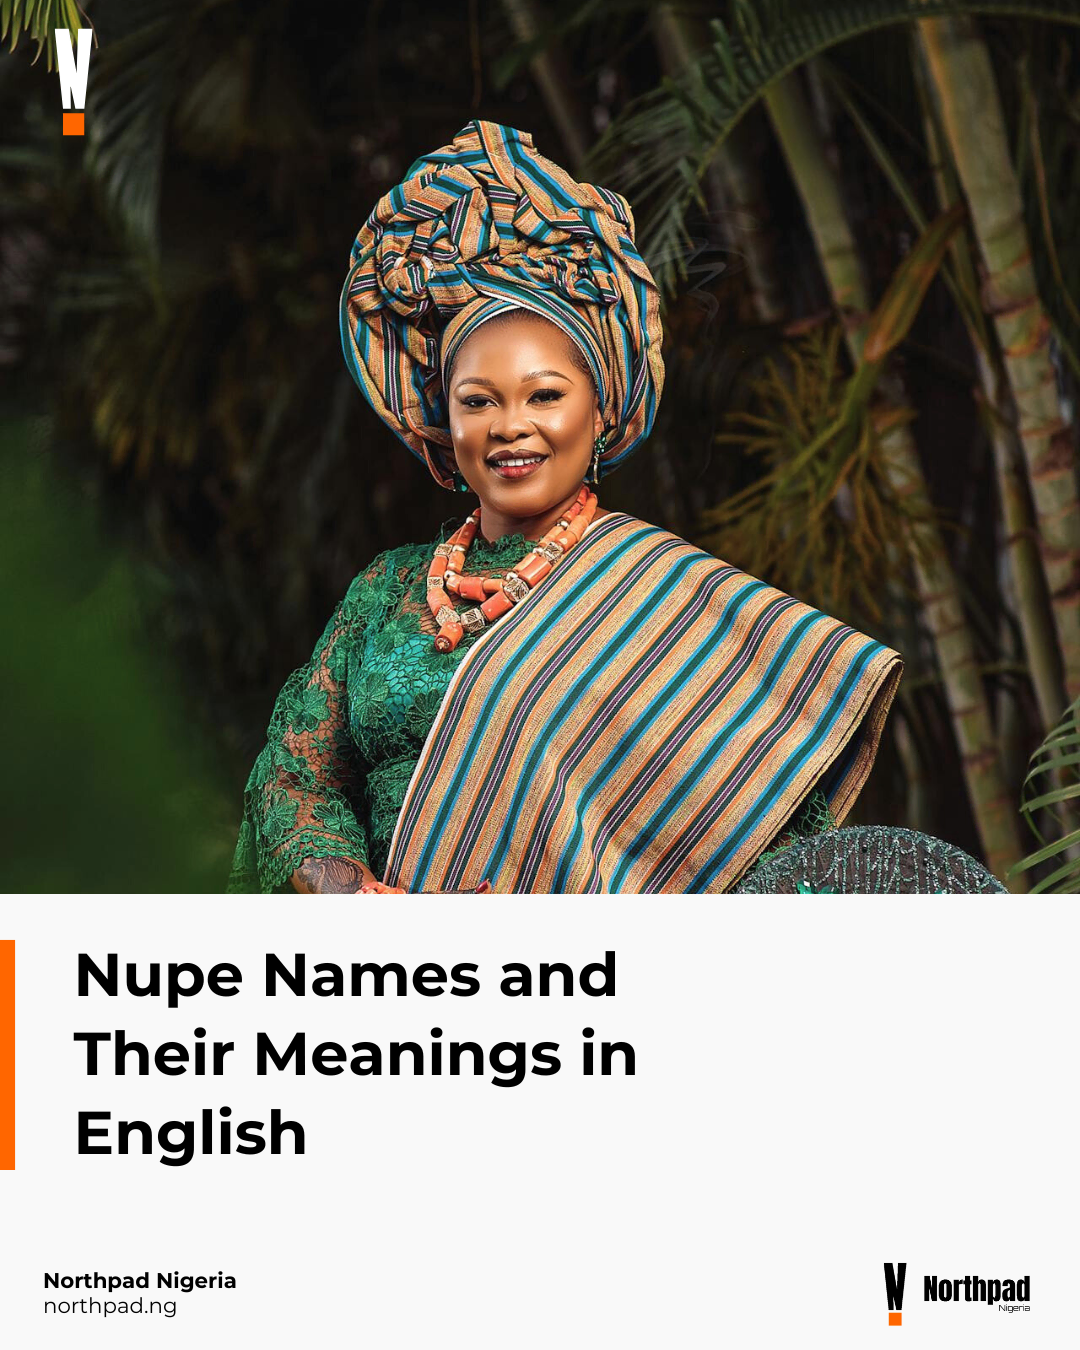 Nupe Names and Their Meanings in English